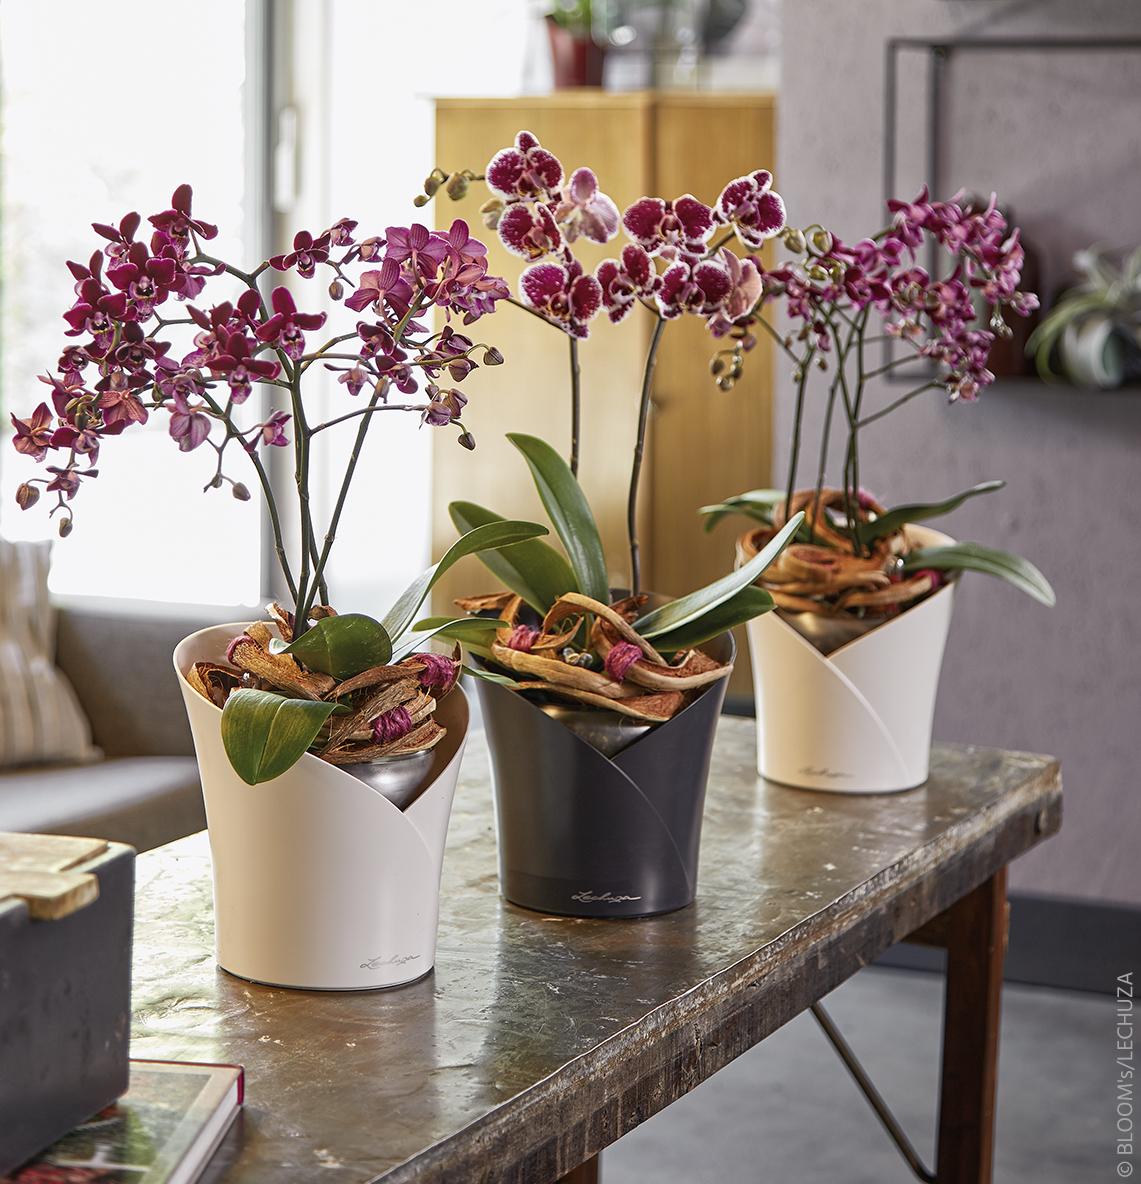 Designed especially for these precious tropical species ORCHIDEA is the new planter from LECHUZA